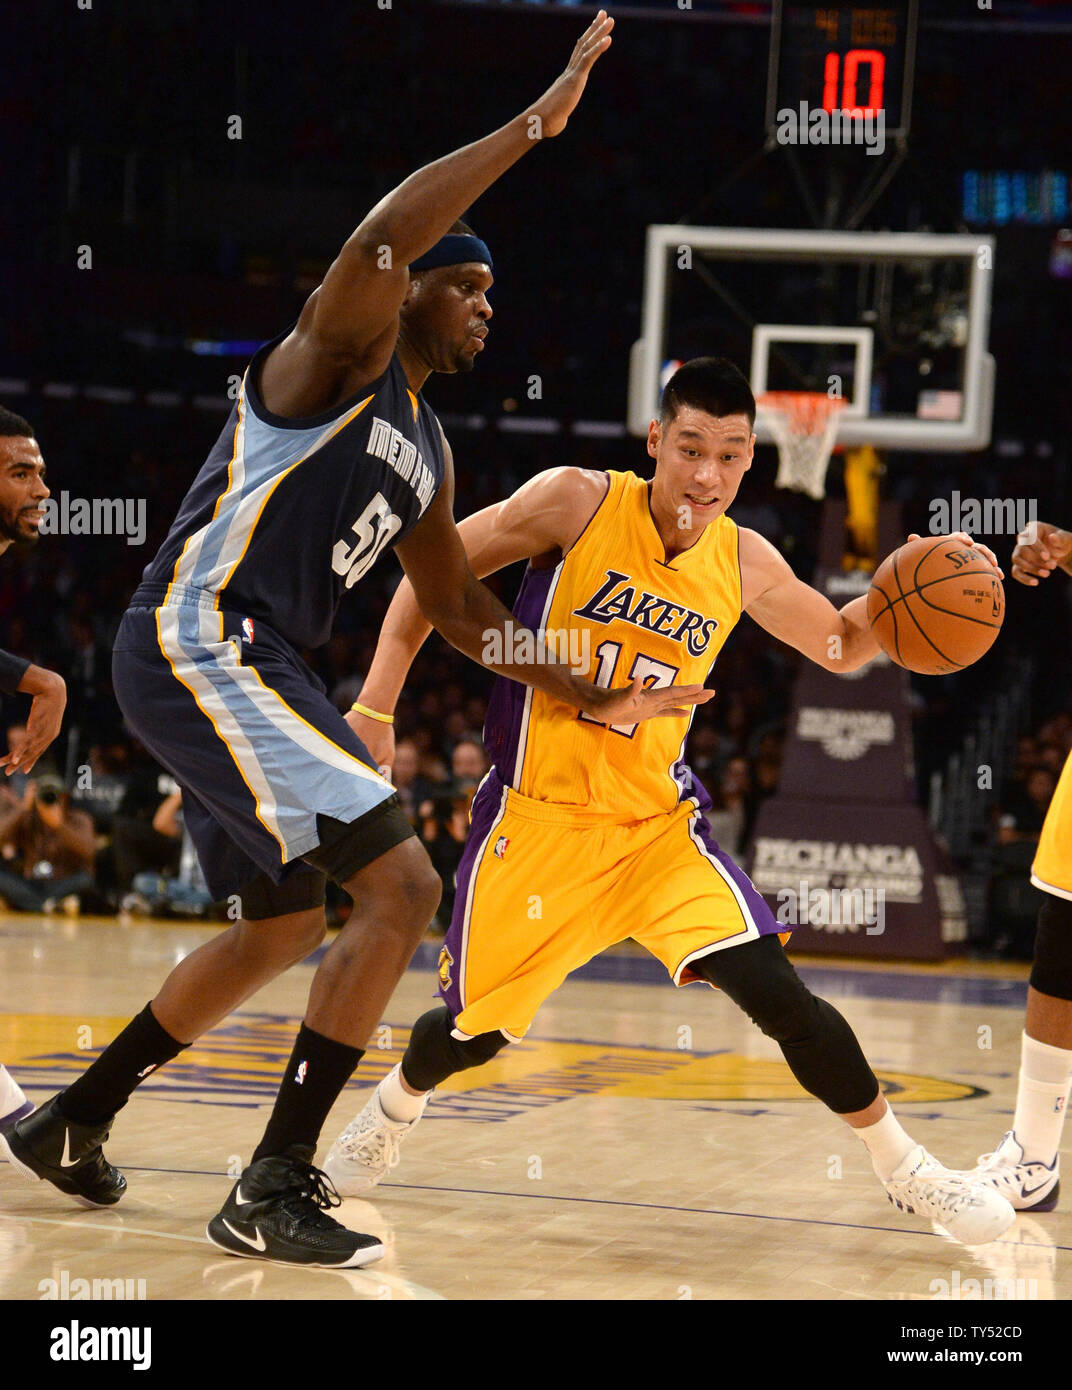 Los Angeles Lakers guard Jeremy Lin (17) dribbles around Memphis Grizzlie forward Zach Randolph (50) during the first half of their NBA game at Staples Center in Los Angeles, November 26, 2014.   UPI/Jon SooHoo Stock Photo